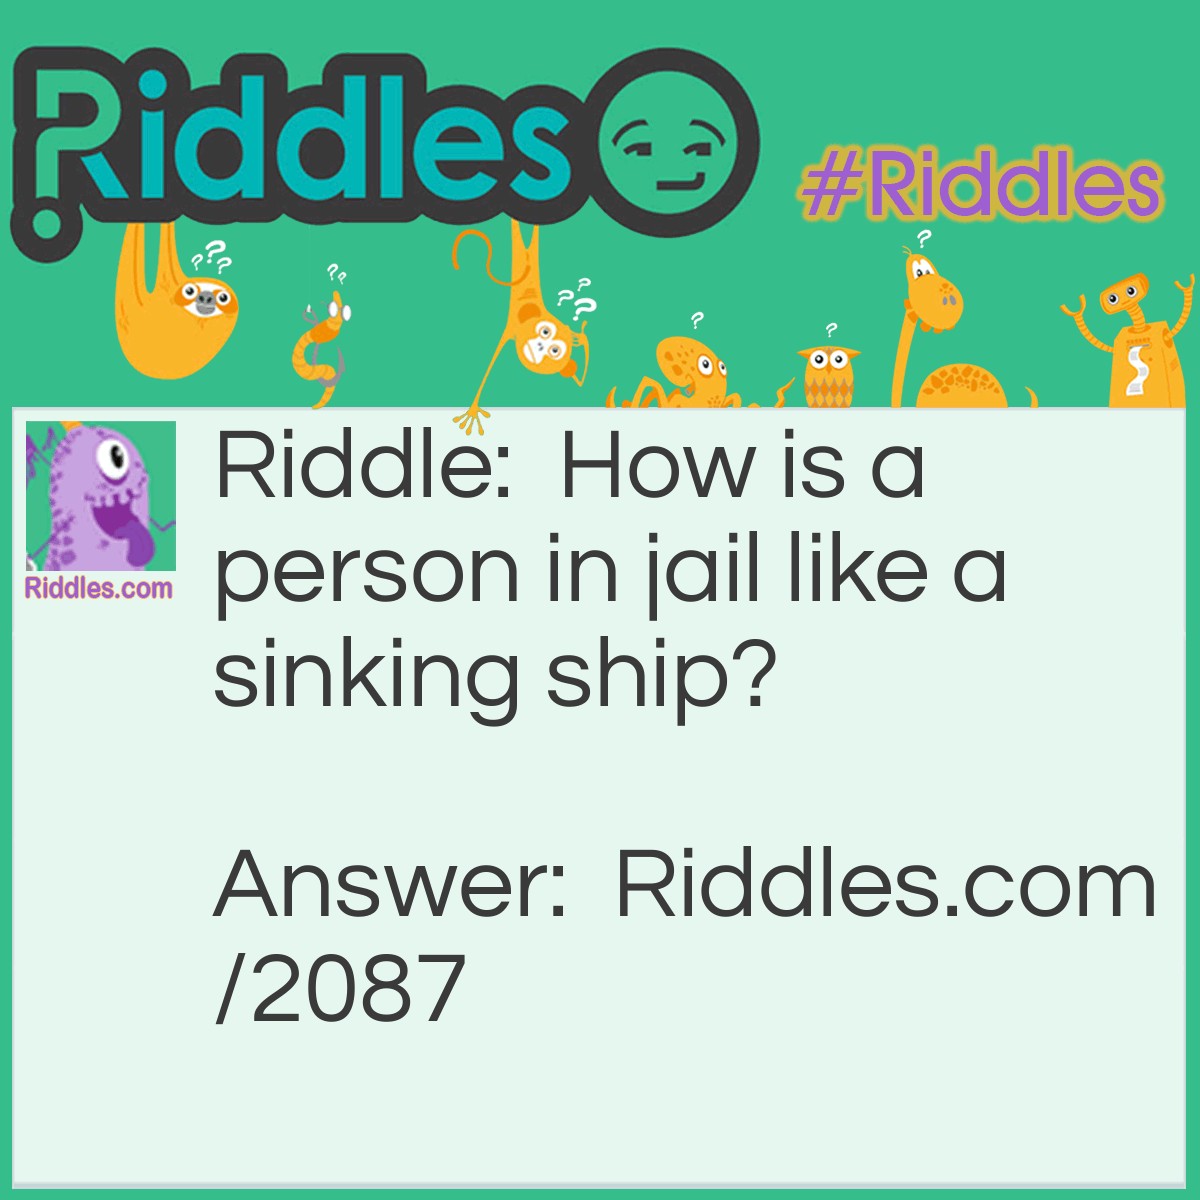 Riddle: How is a person in jail like a sinking ship? Answer: Both want to be bailed out.